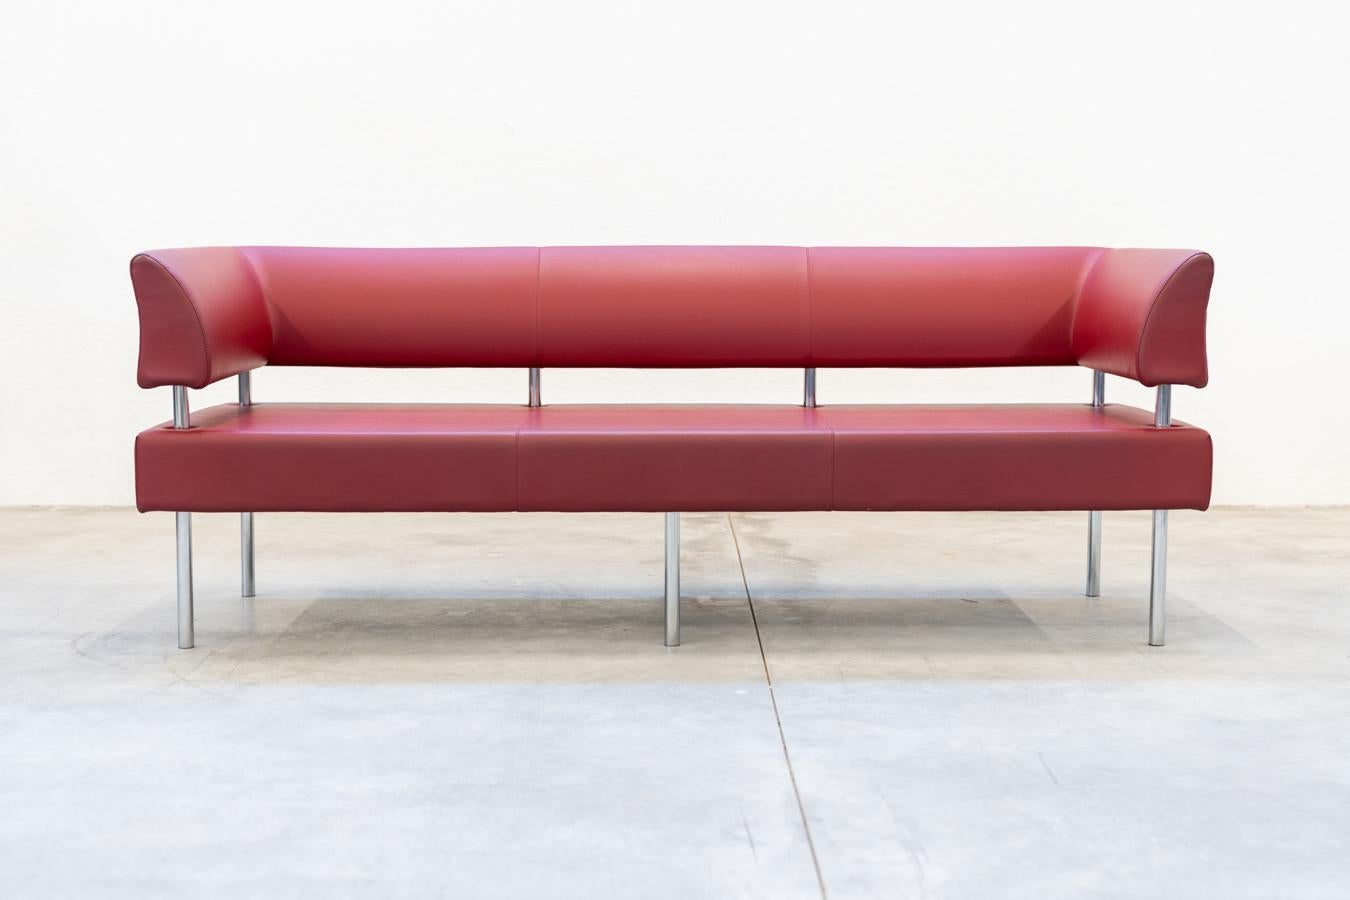 3-seater Business Class sofa in red leather and chrome iron feet,1990s
Beauty Star upholstered sofa	, made in Italy, with shapes that emphasize 	reliability and excellent choice for office furniture installation.
Style
Vintage
Periodo del